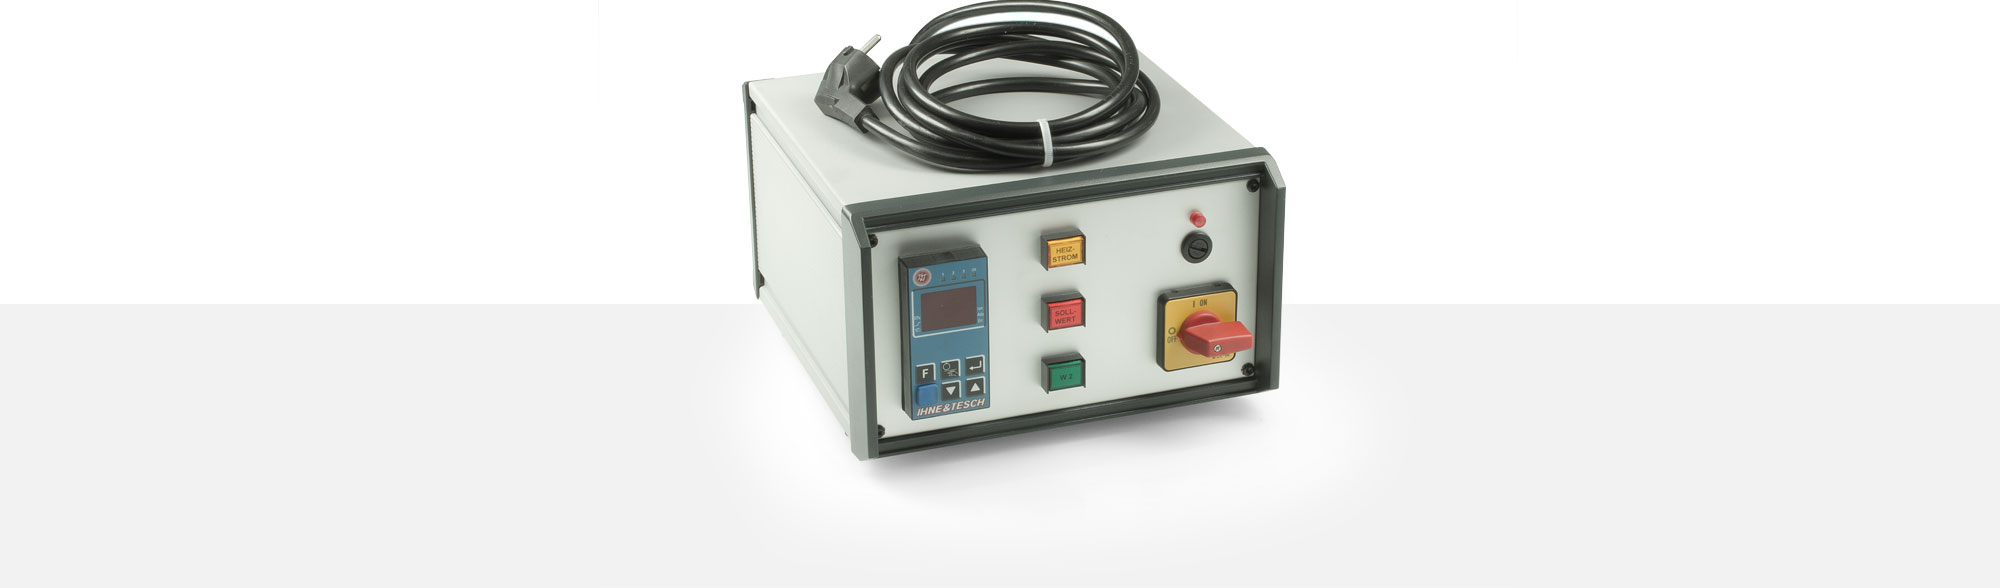 Control Unit, temperature monitoring, hot runner system, plasics processing, packaging industry, food industry, heat load monitoring, temperature monitoring, start-up circuitiry ,alarm output,  Low Cost variant